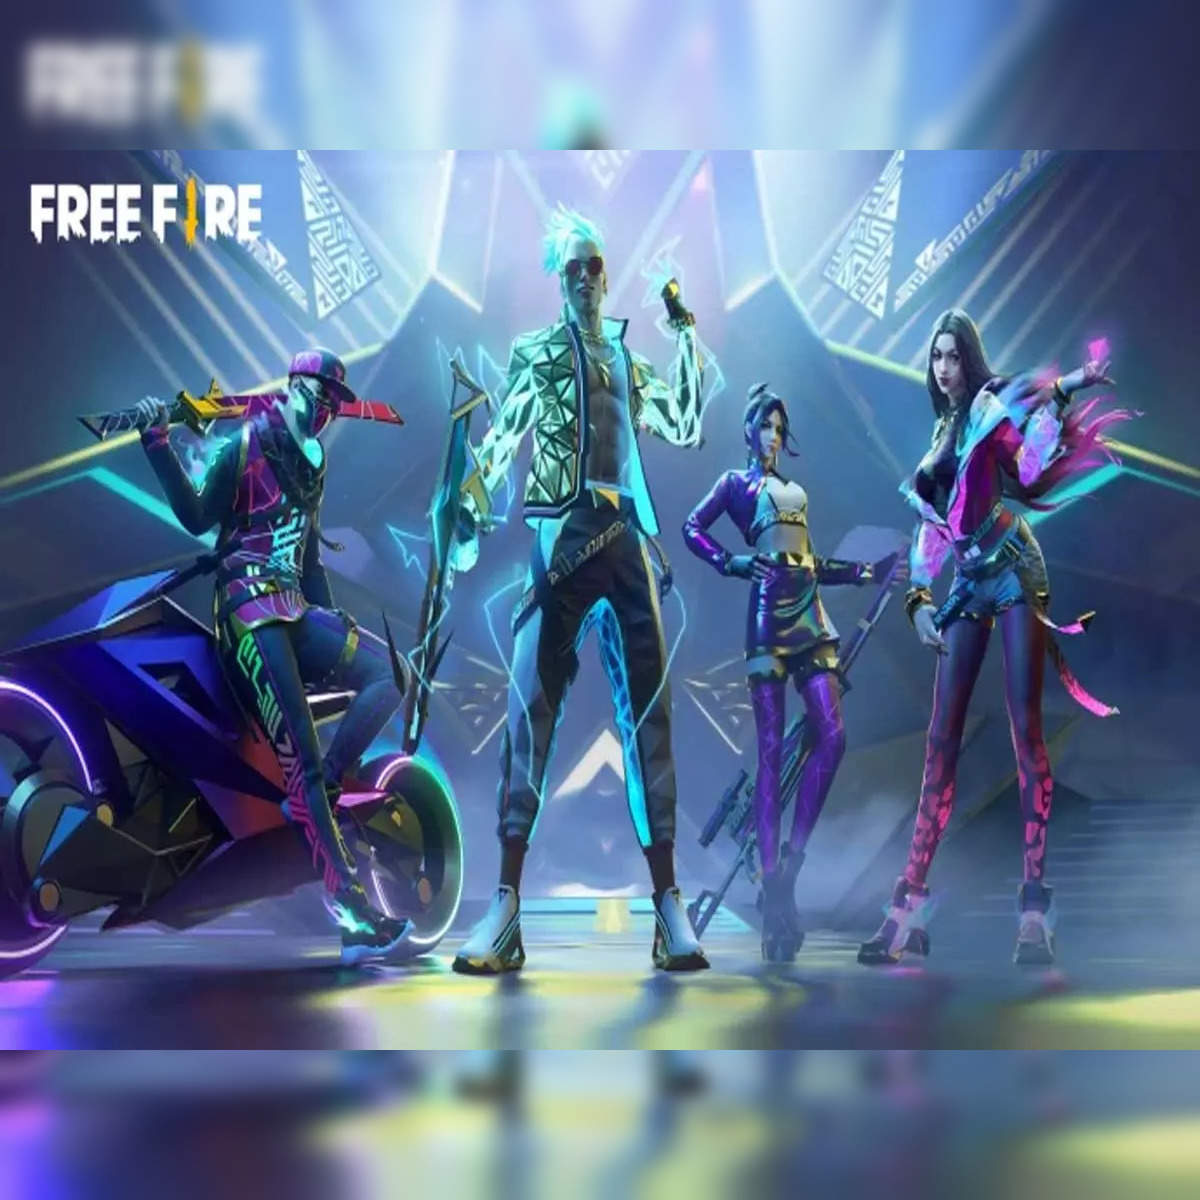 Garena Free Fire MAX redeem codes for March 18, 2023: Check here